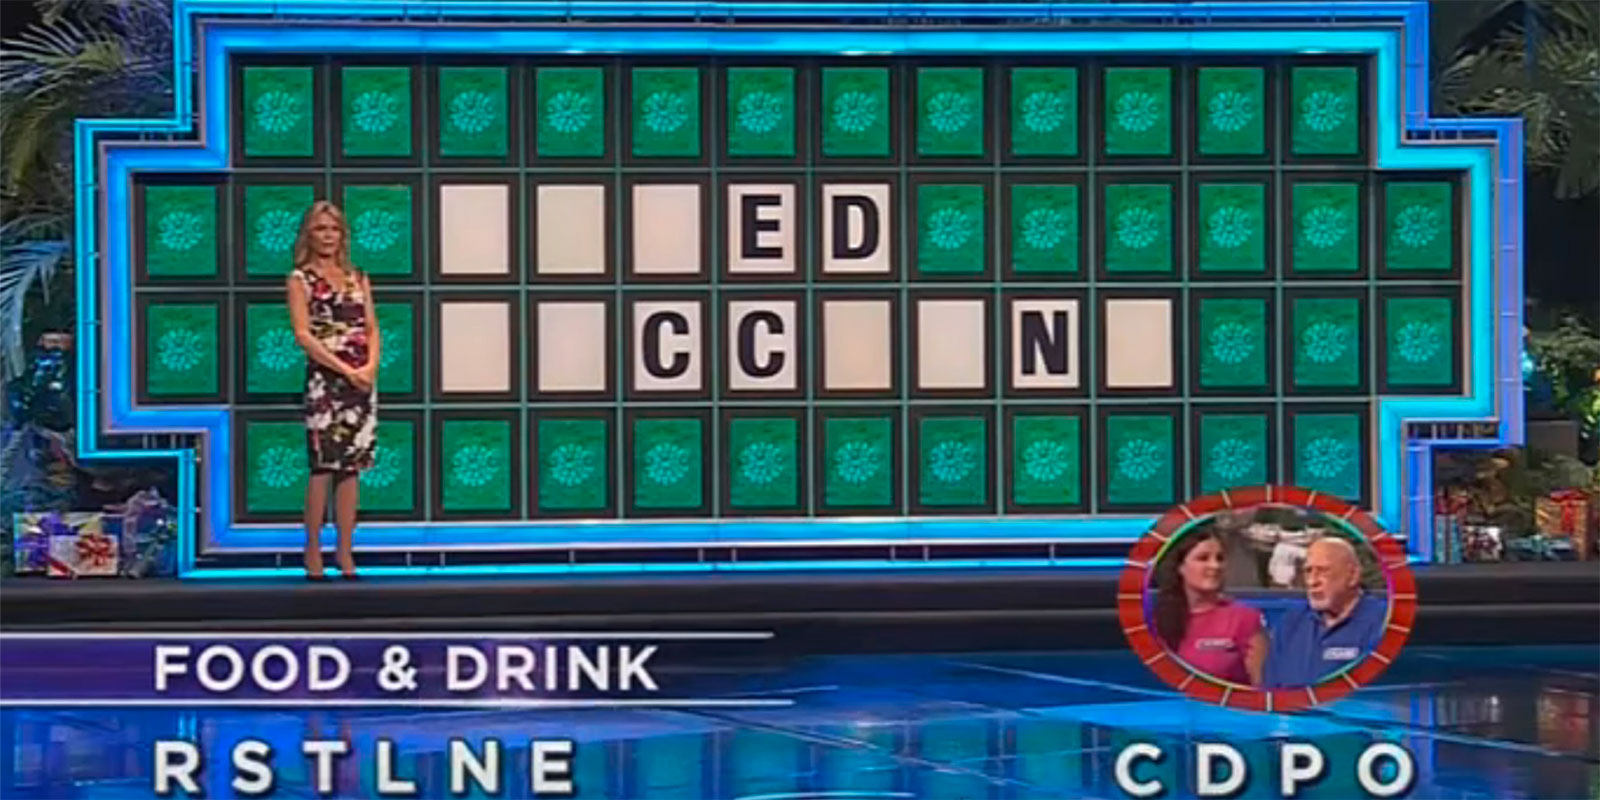 On the map wheel of fortune game